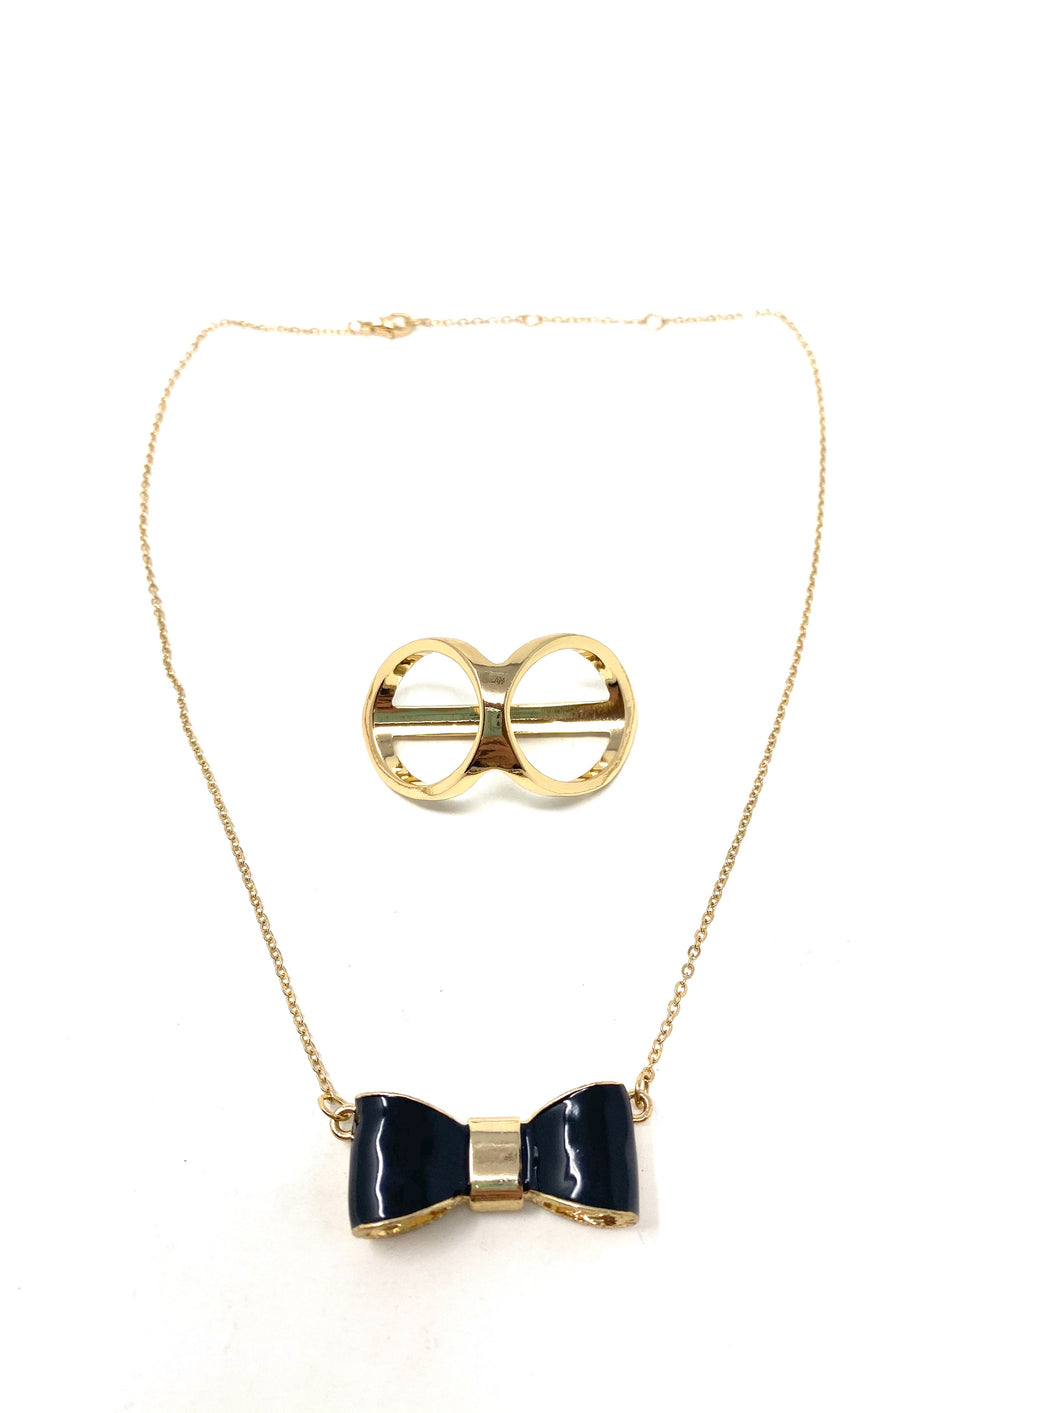 Black Tie Affair Necklace and Ring Set